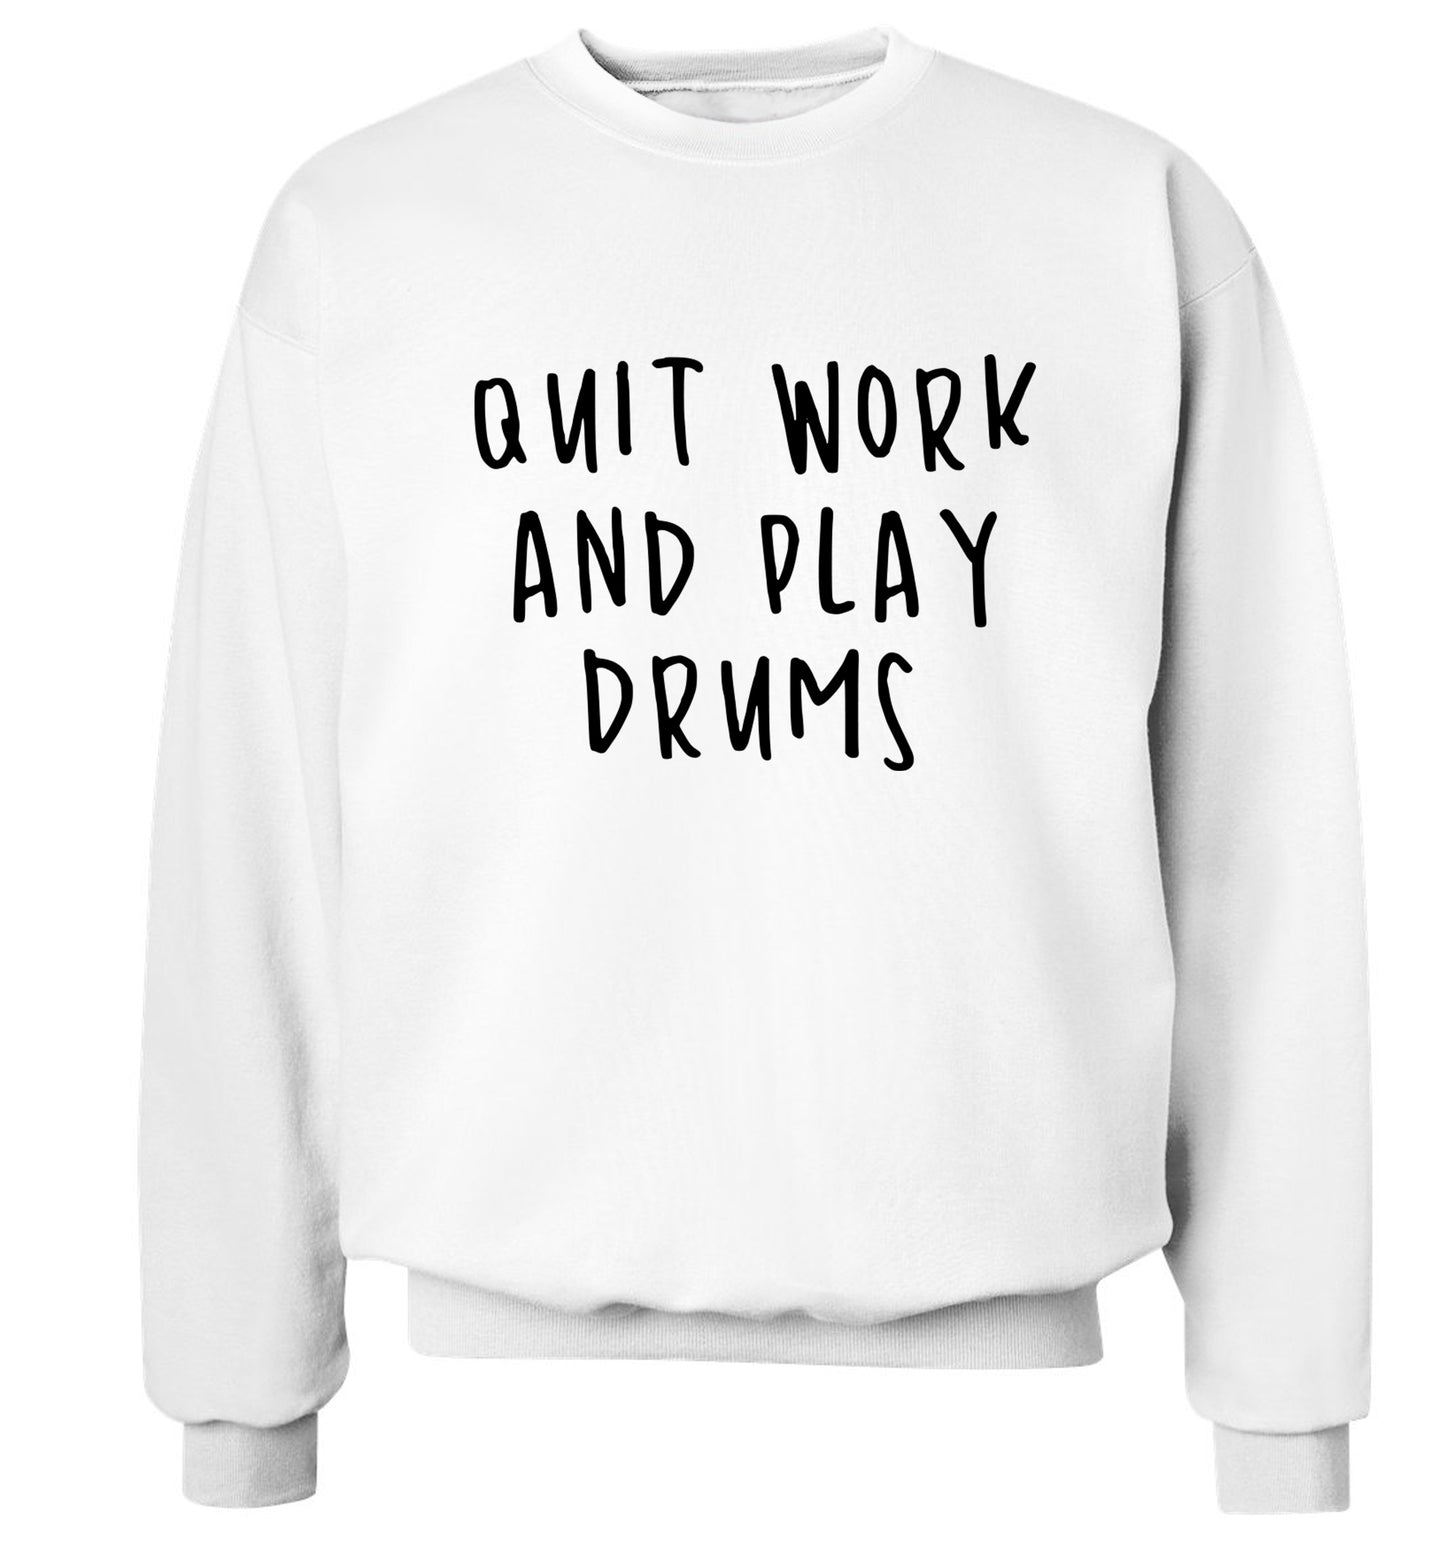 Quit work and play drums Adult's unisex white Sweater 2XL